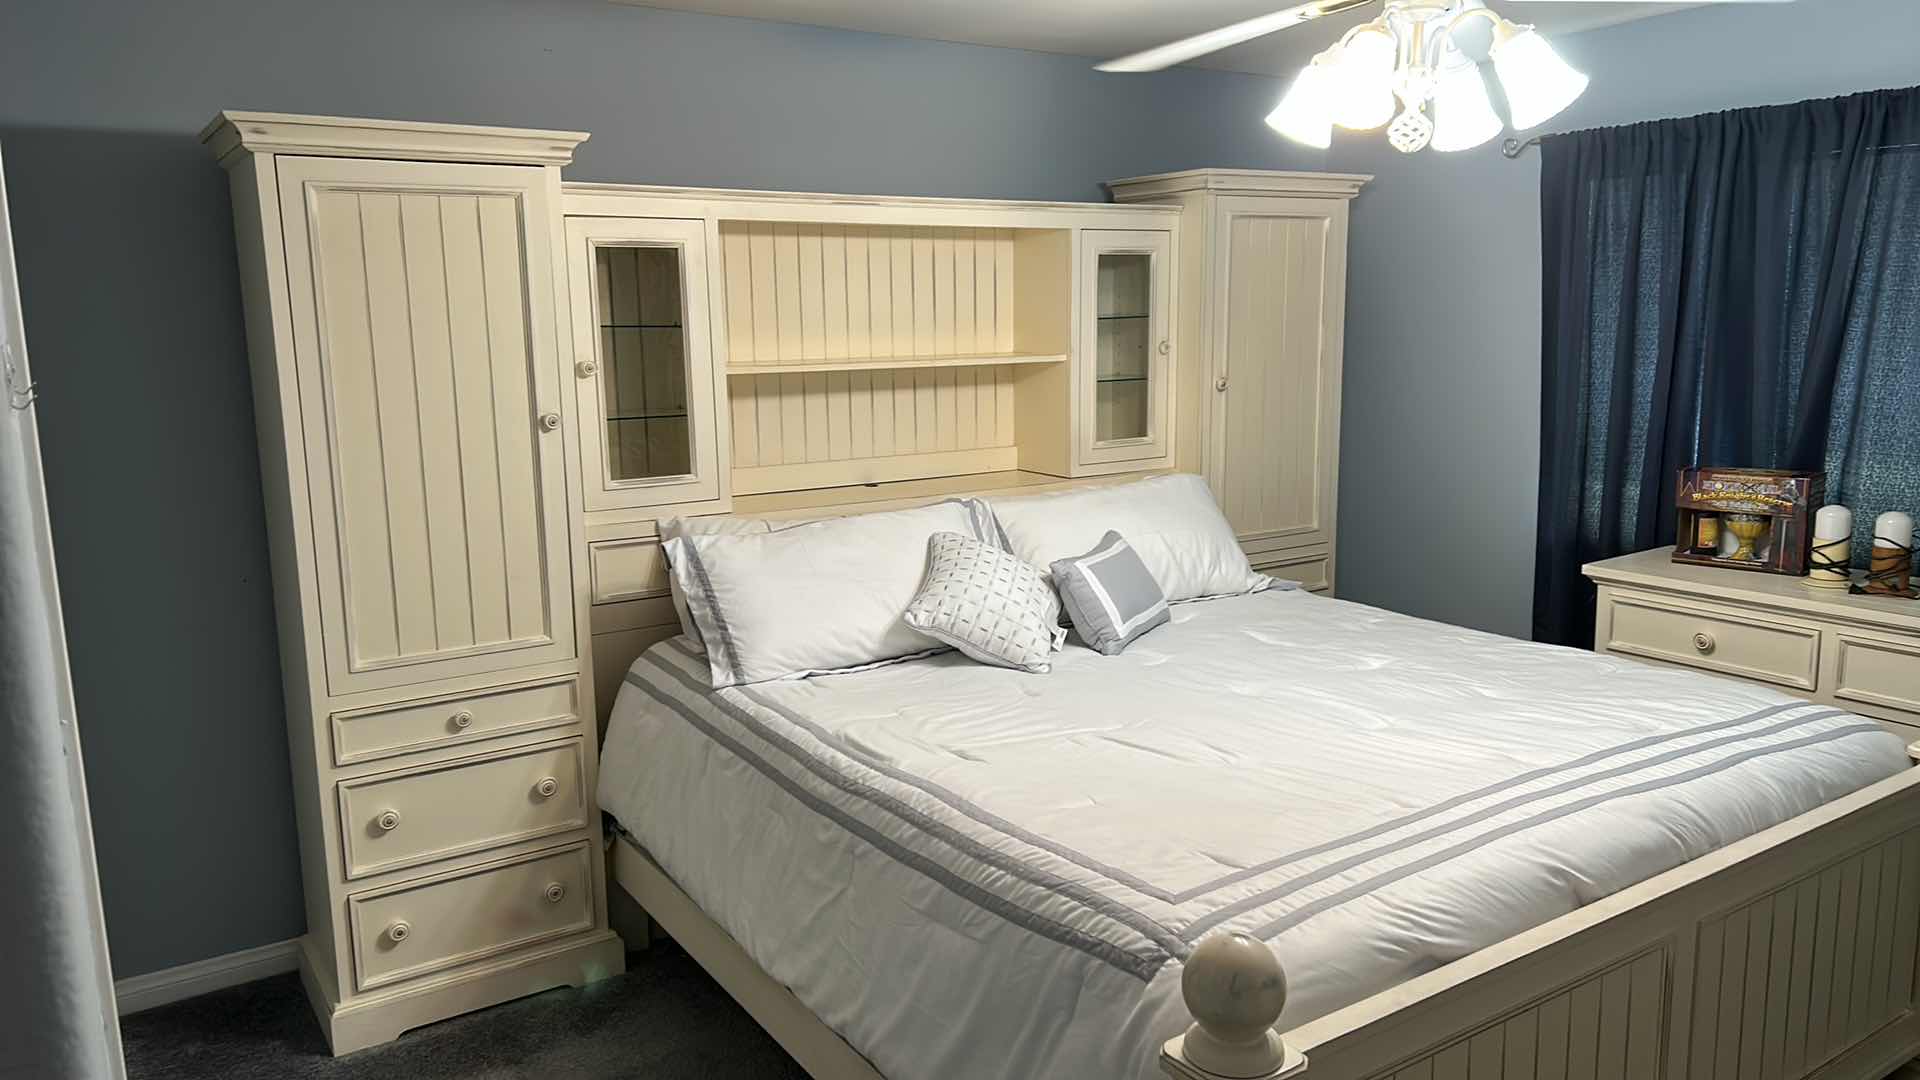 Photo 1 of ASHLEY FURNITURE CREAM FARMHOUSE STYLE BEDROOM SET (EXCLUDES MATTRESS AND BEDDING) $6000 10’6.5” x 19” x H6’8”